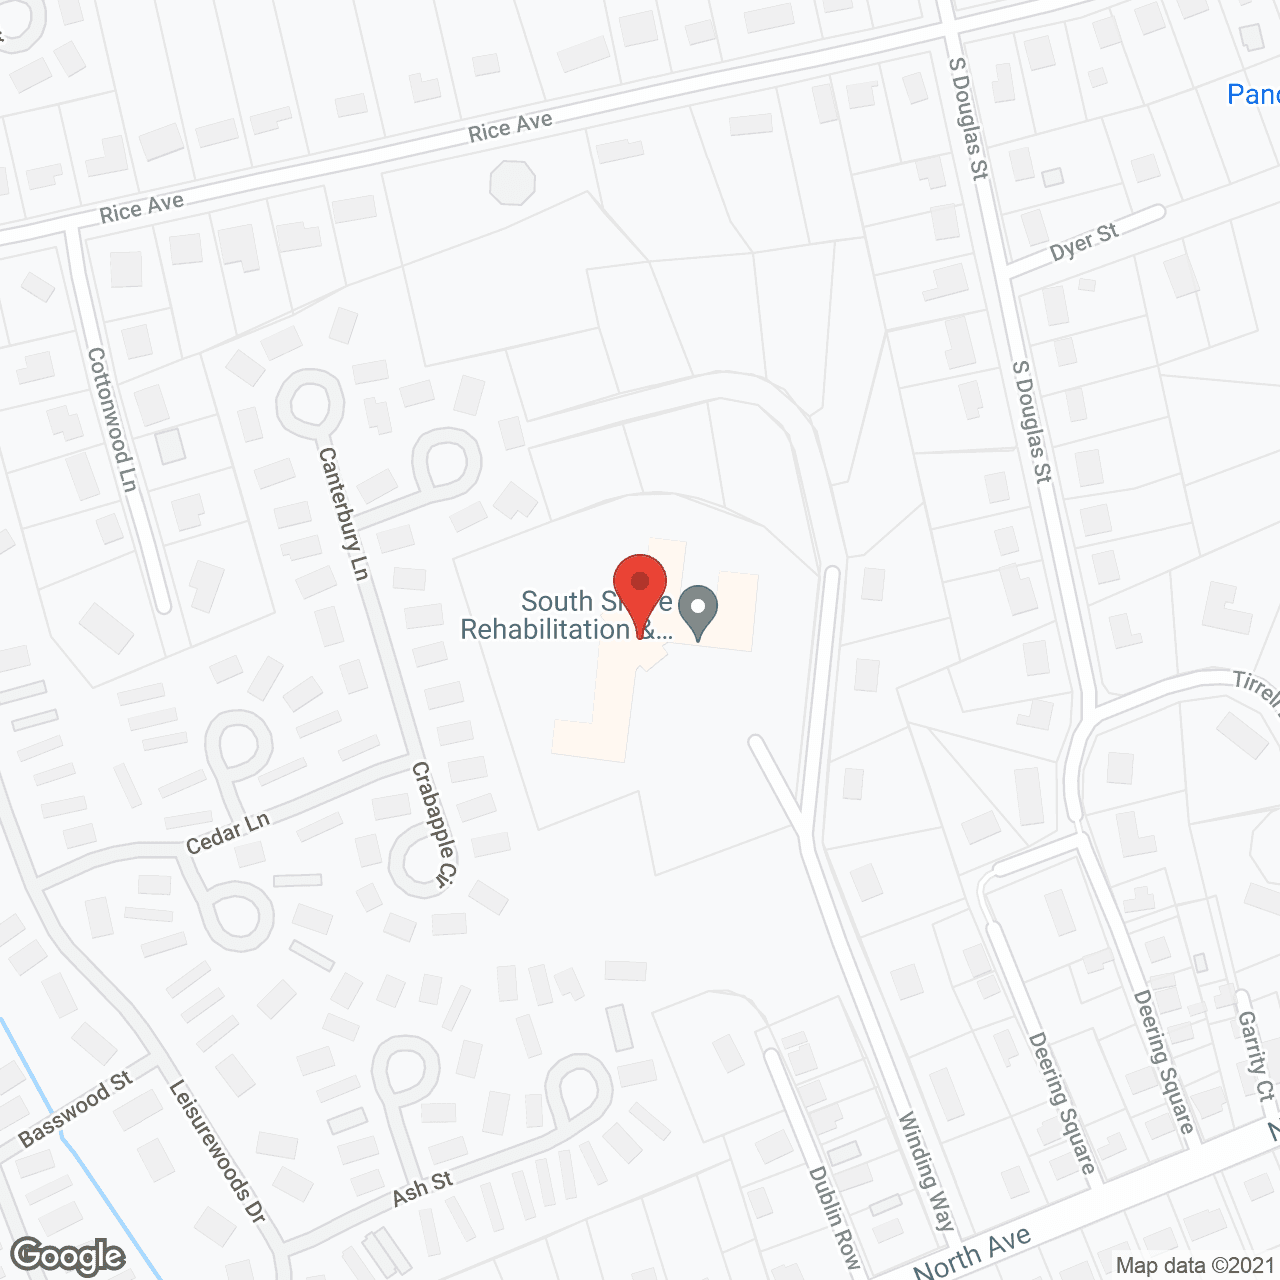 South Shore Rehabilitation and Skilled Care Center in google map